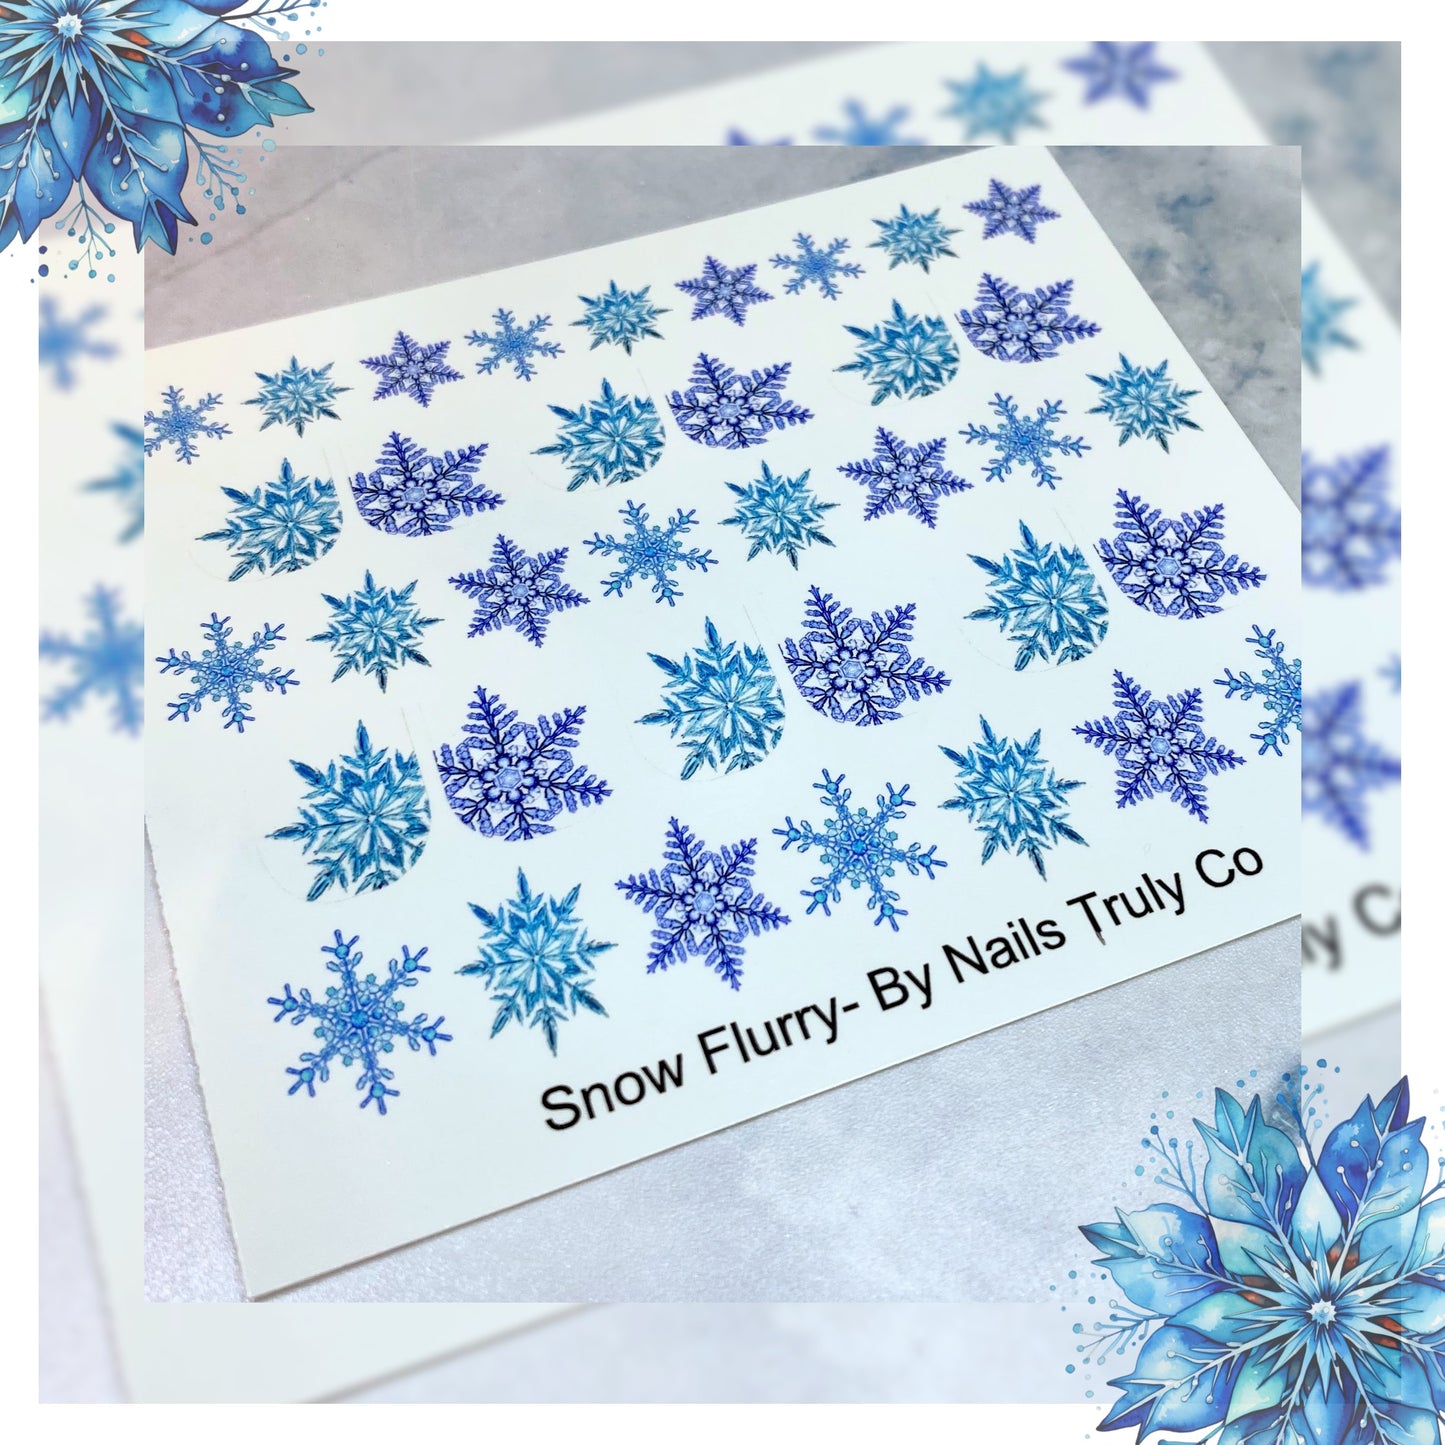 Snow Flurry  Snowflake Decals For Nails